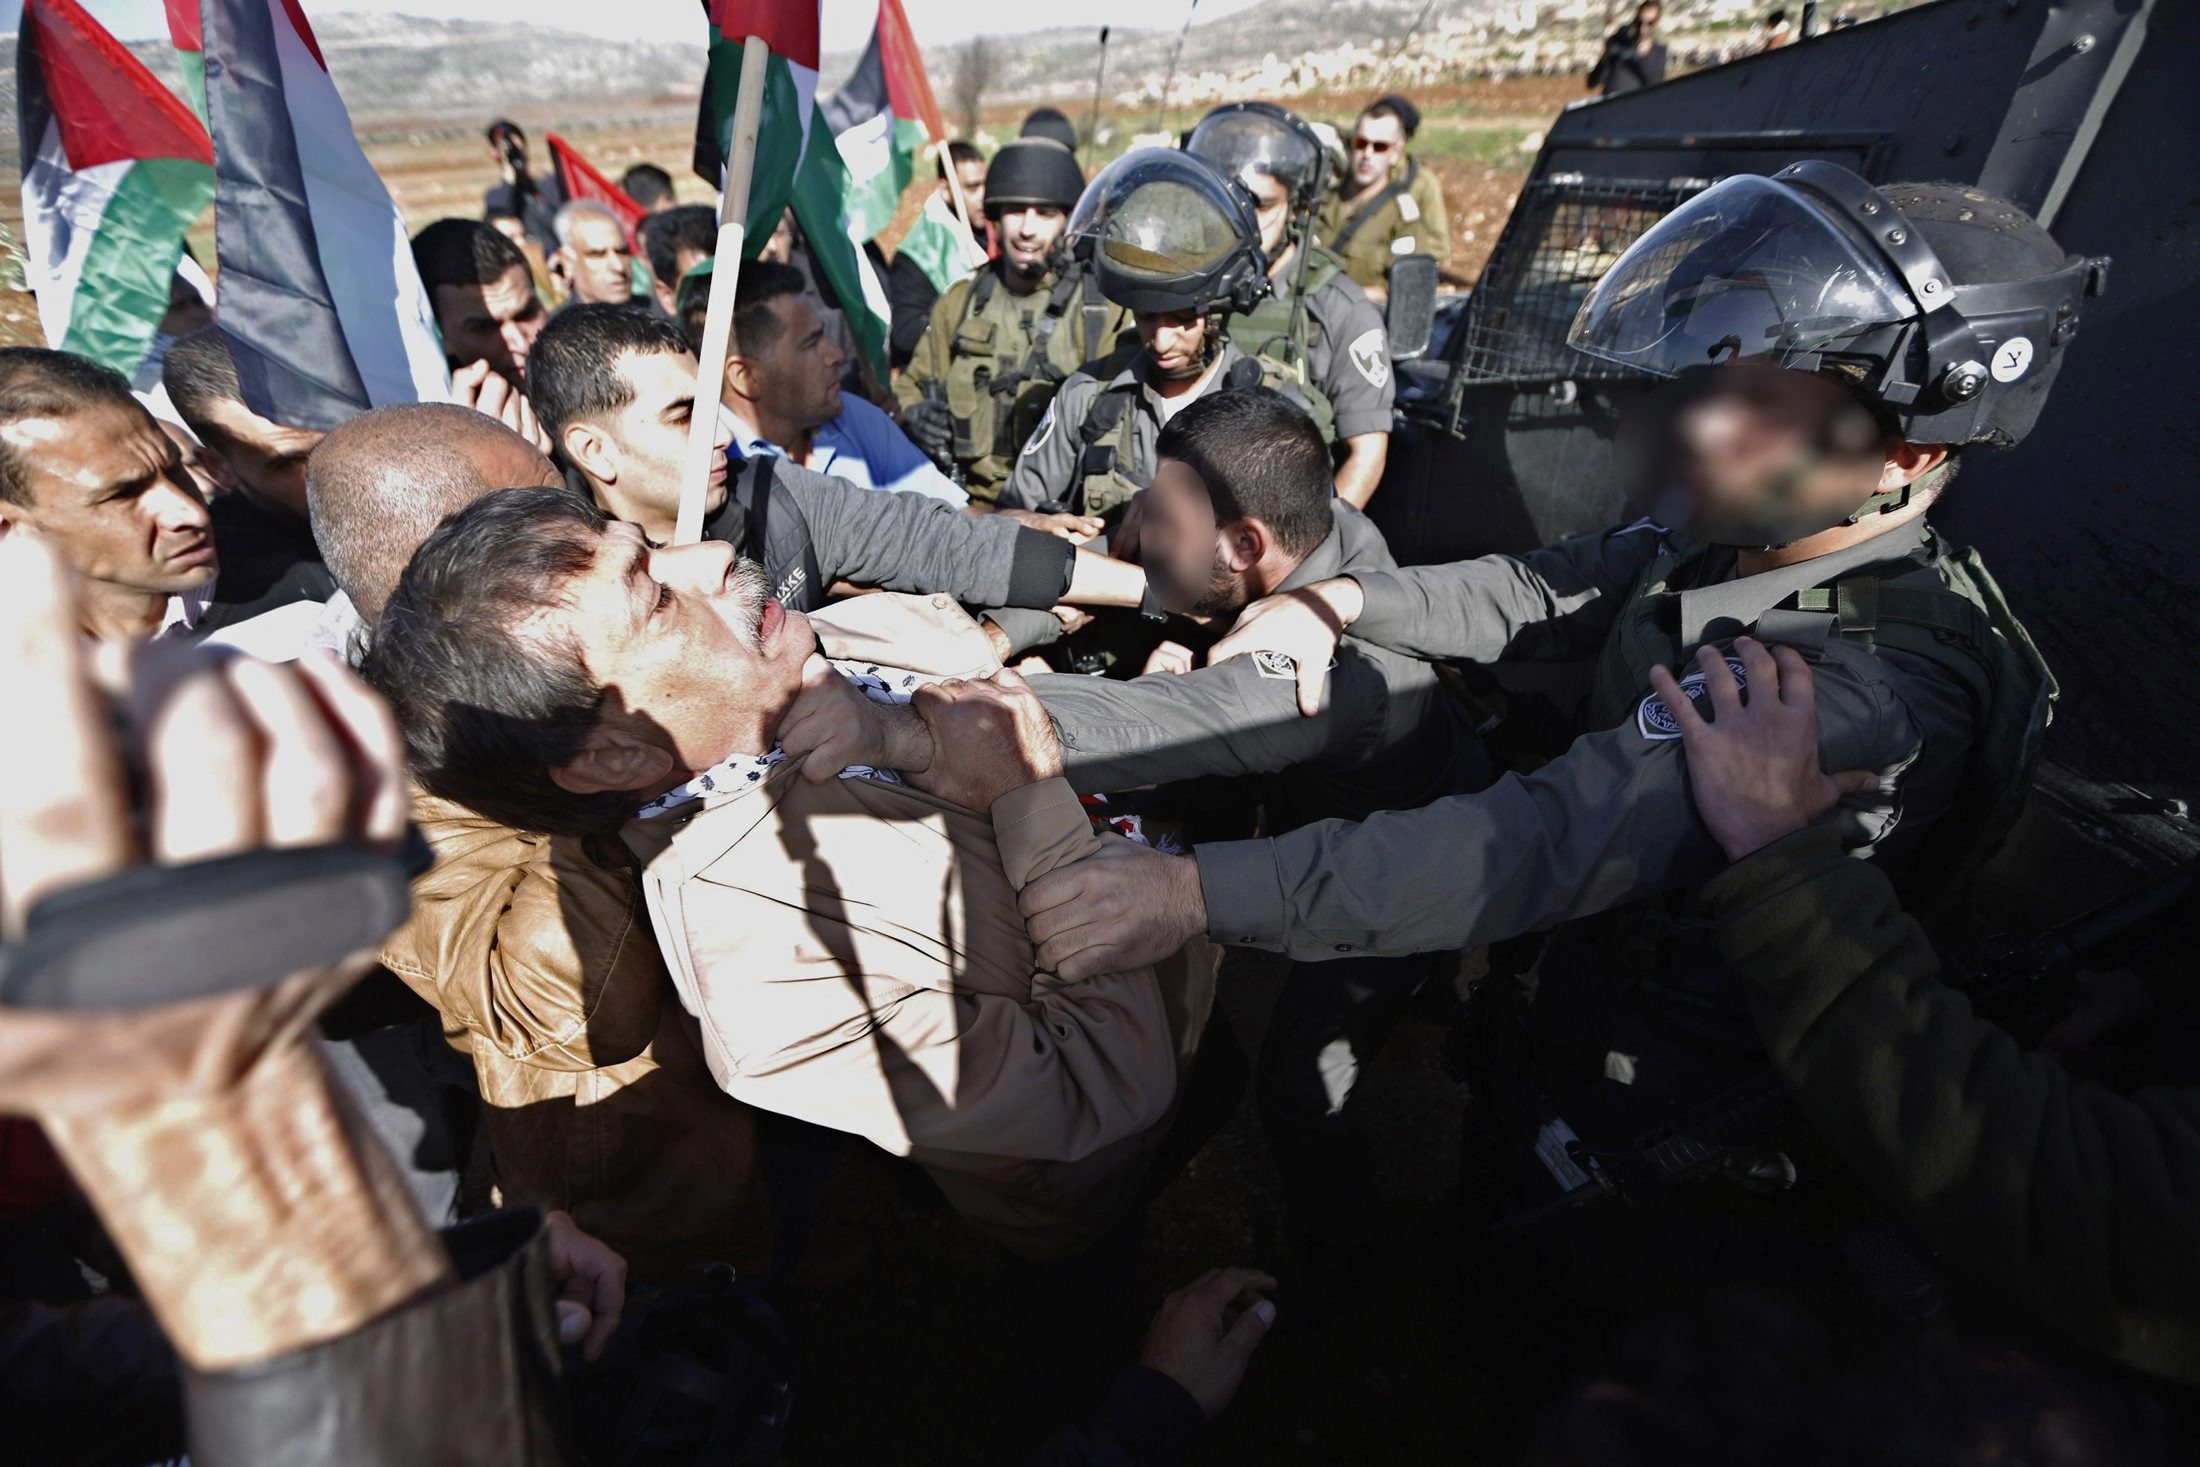 Palestinian minister killed at protest In West Bank